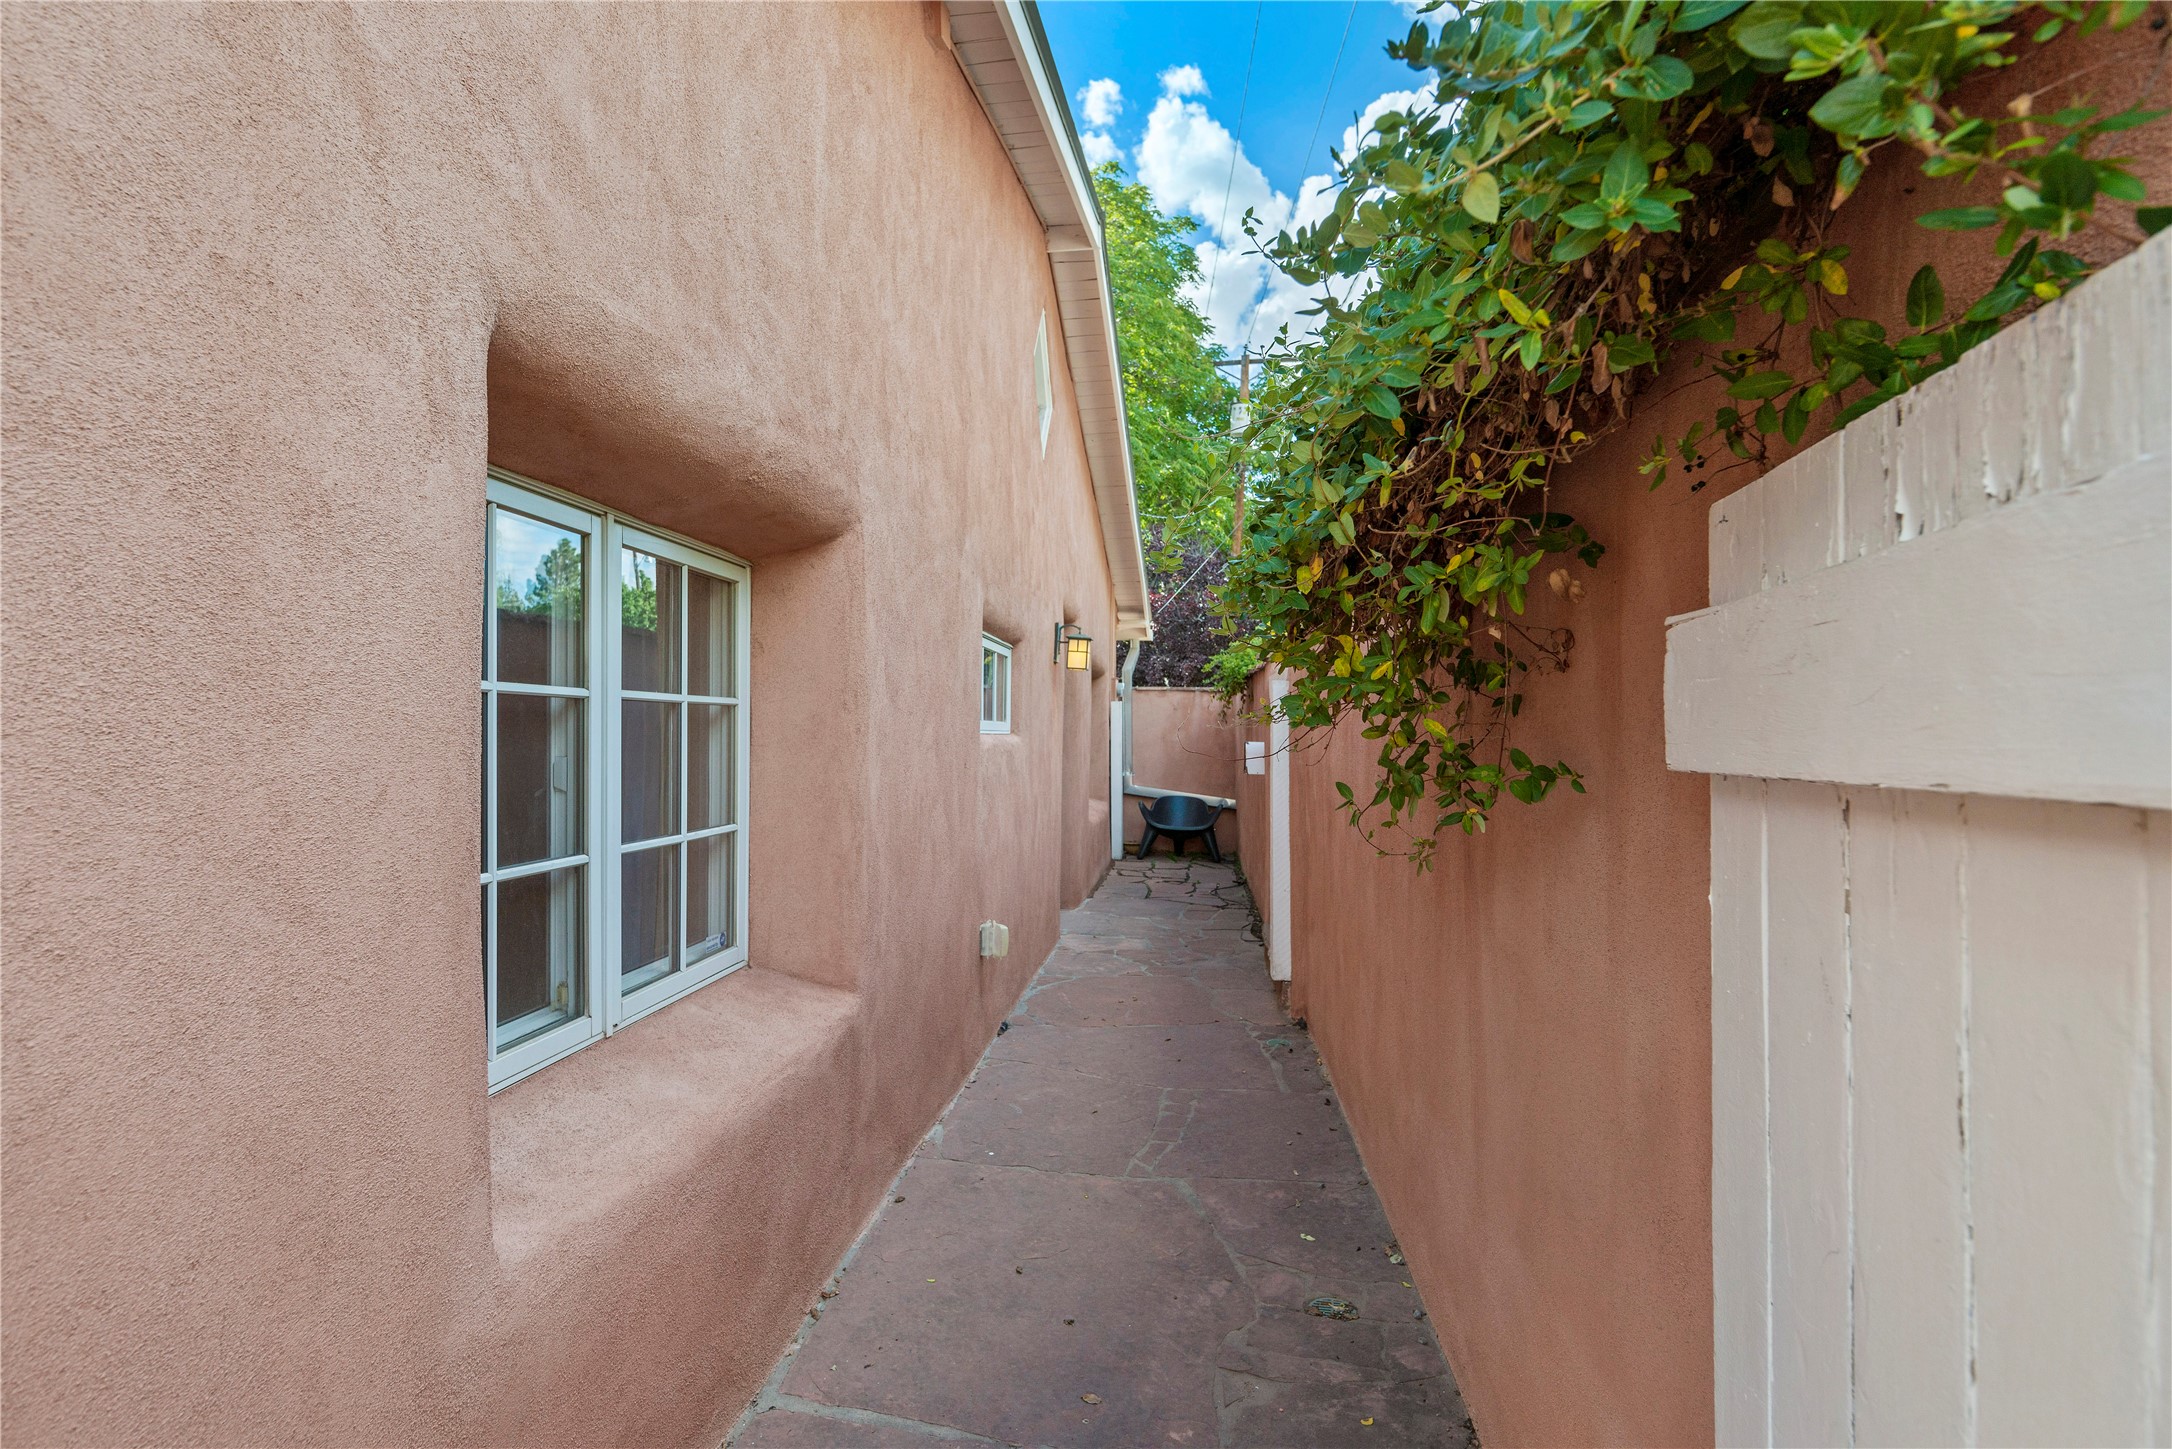 864 E Palace Avenue, Santa Fe, New Mexico 87501, 2 Bedrooms Bedrooms, ,2 BathroomsBathrooms,Residential,For Sale,864 E Palace Avenue,202231954